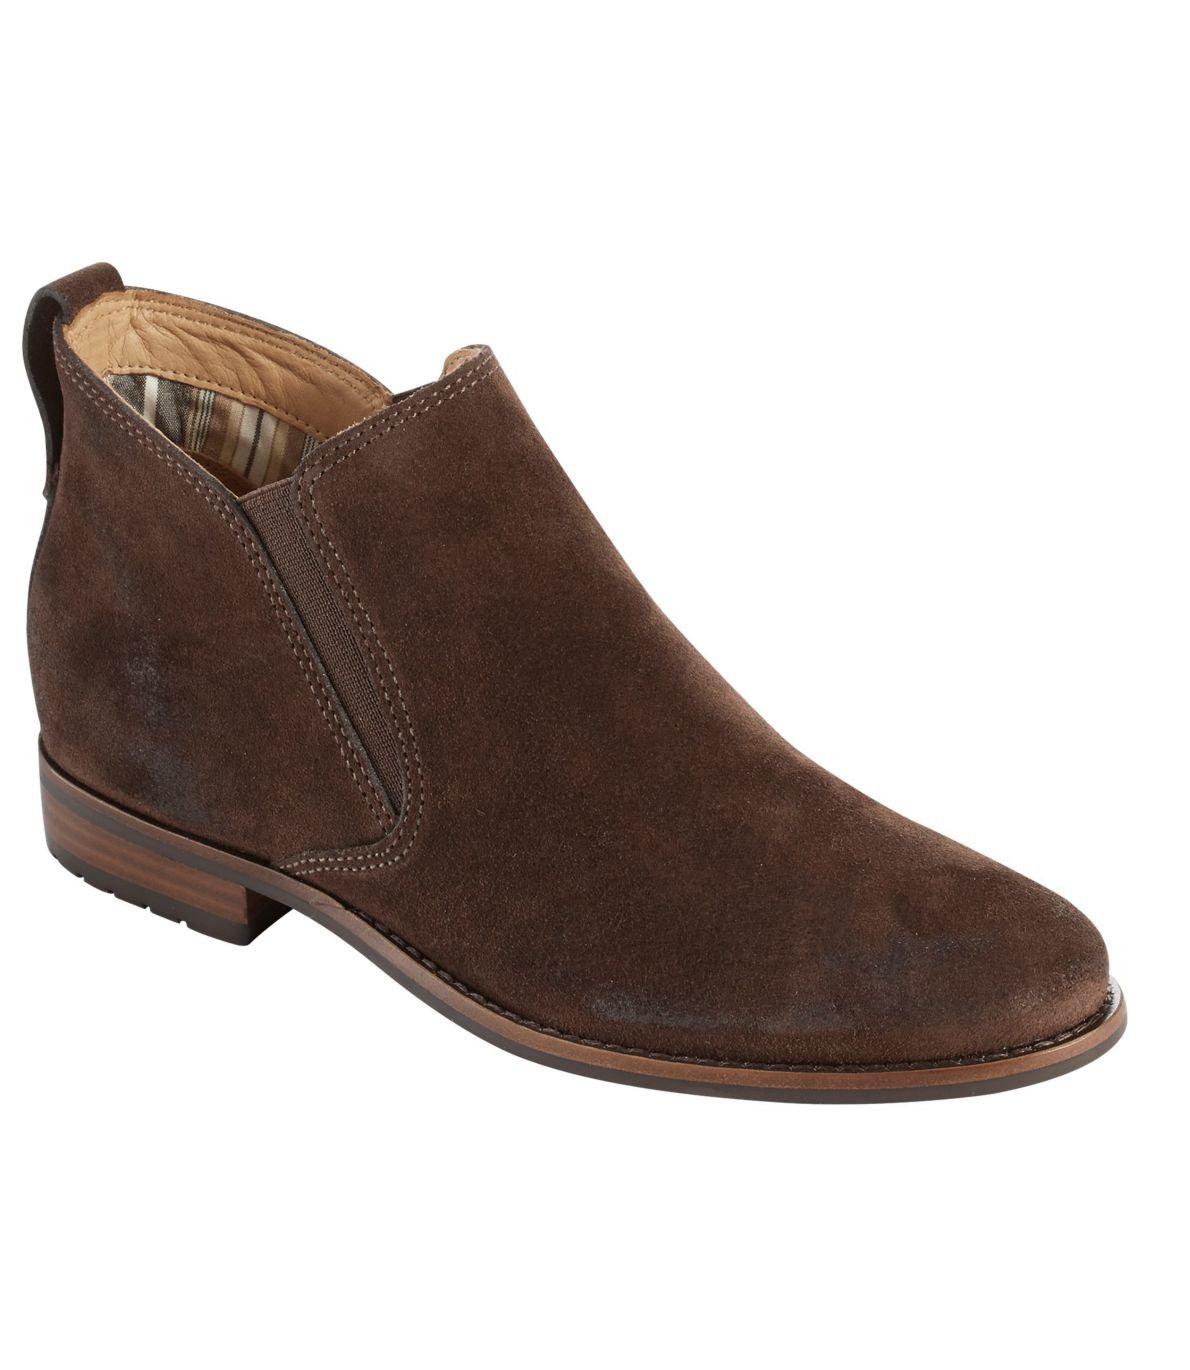 Women's Westport Ankle Boots, Oiled Suede